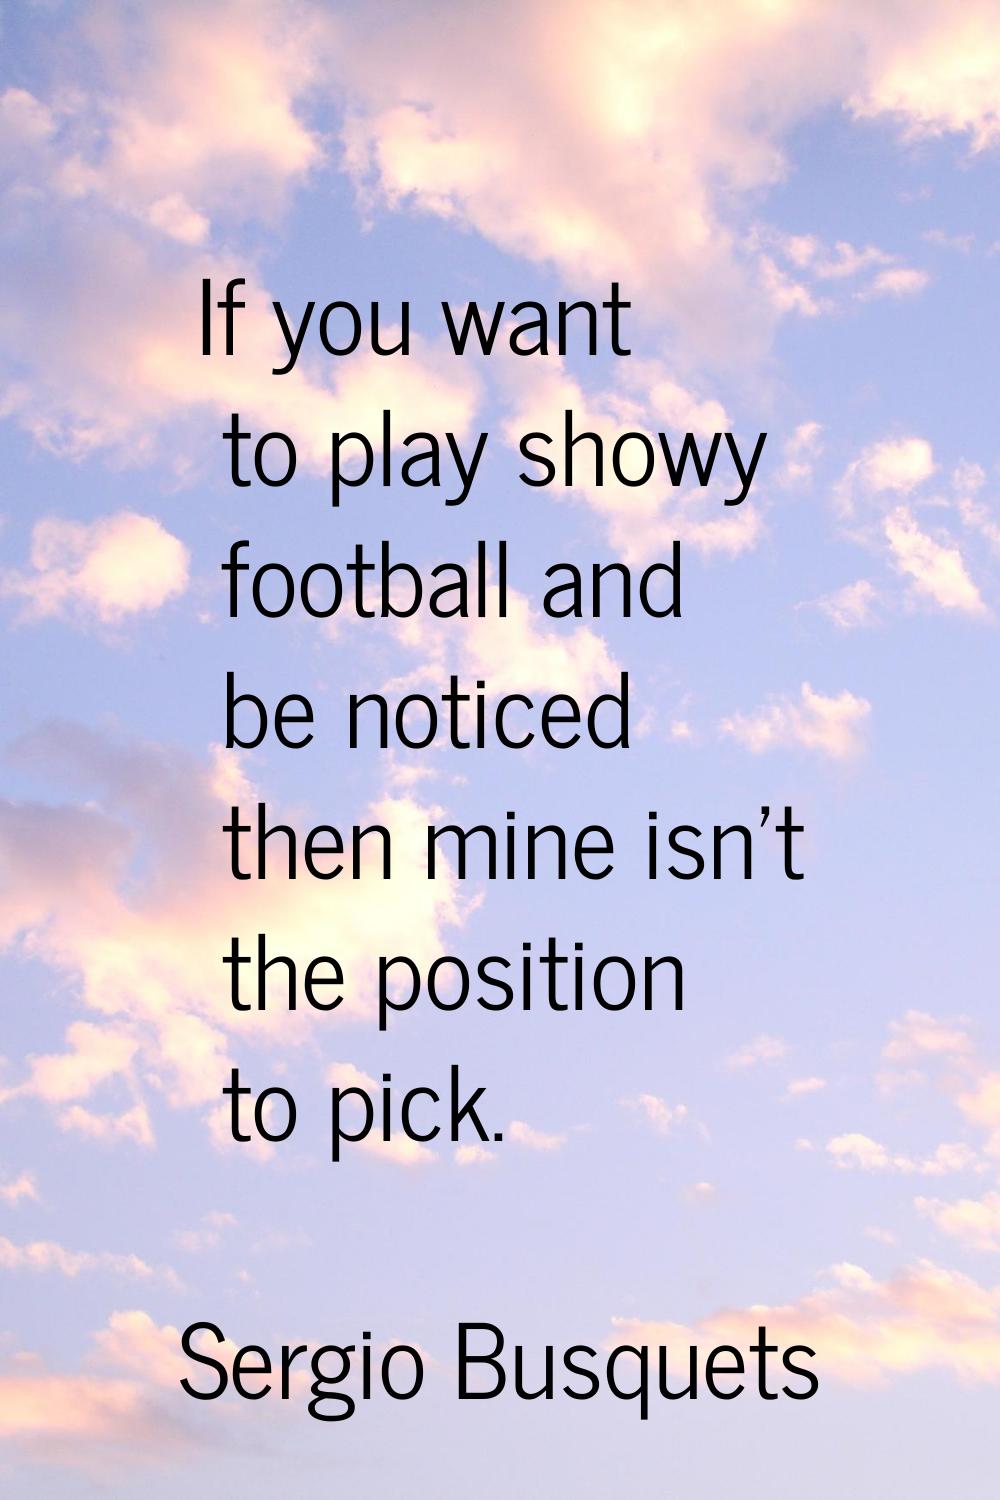 If you want to play showy football and be noticed then mine isn't the position to pick.